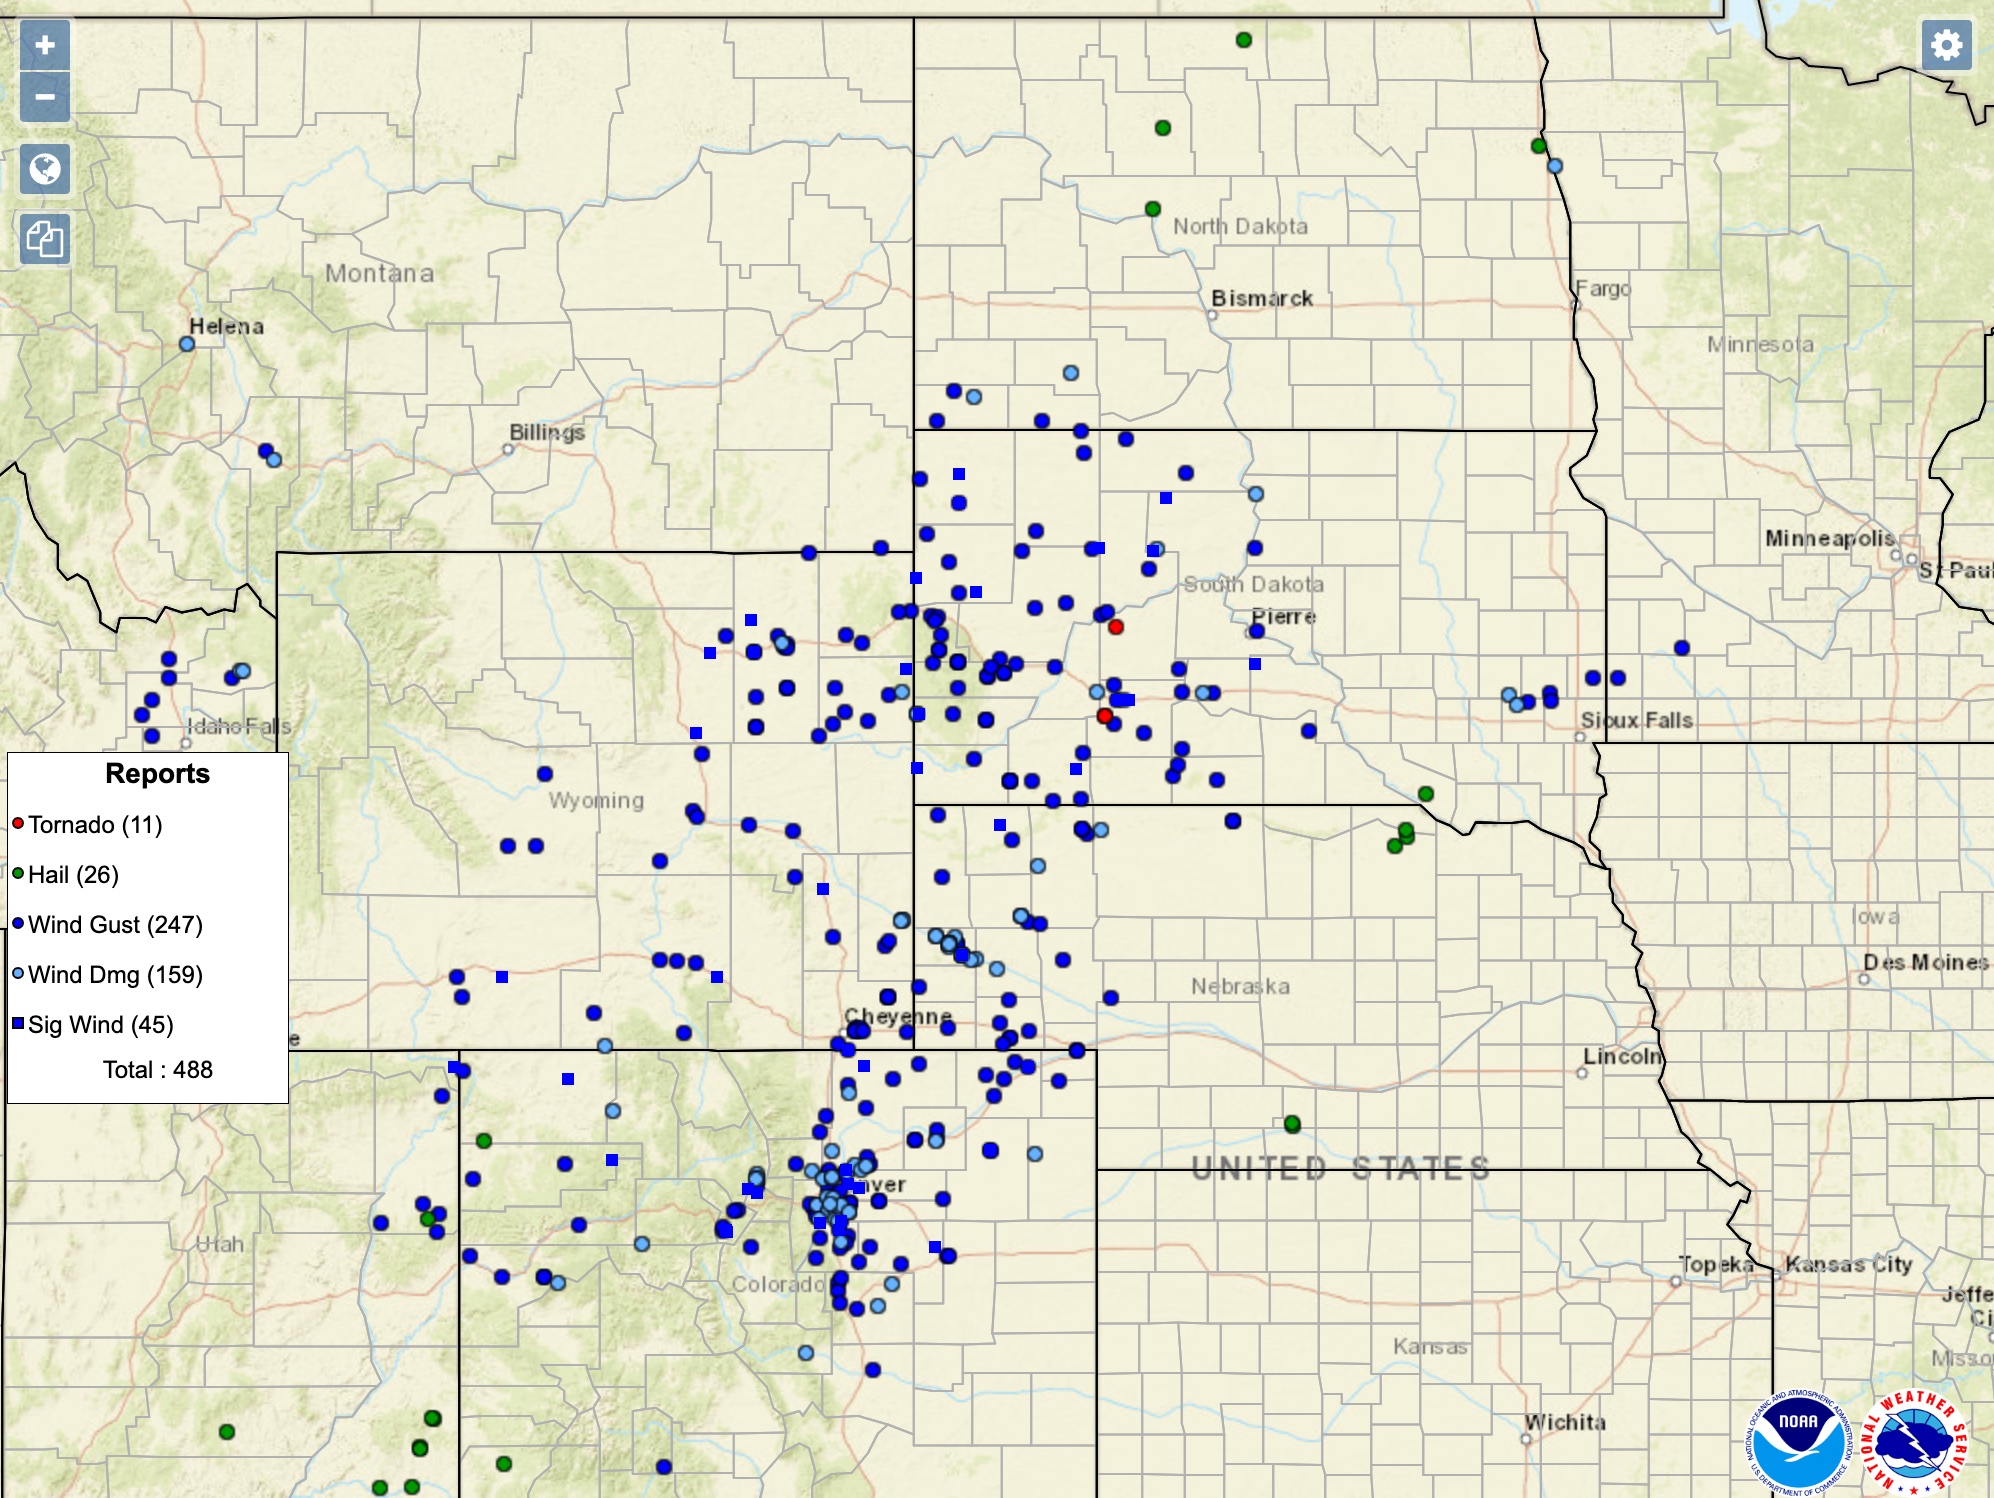 Regional view of the storm reports from the June 6th event